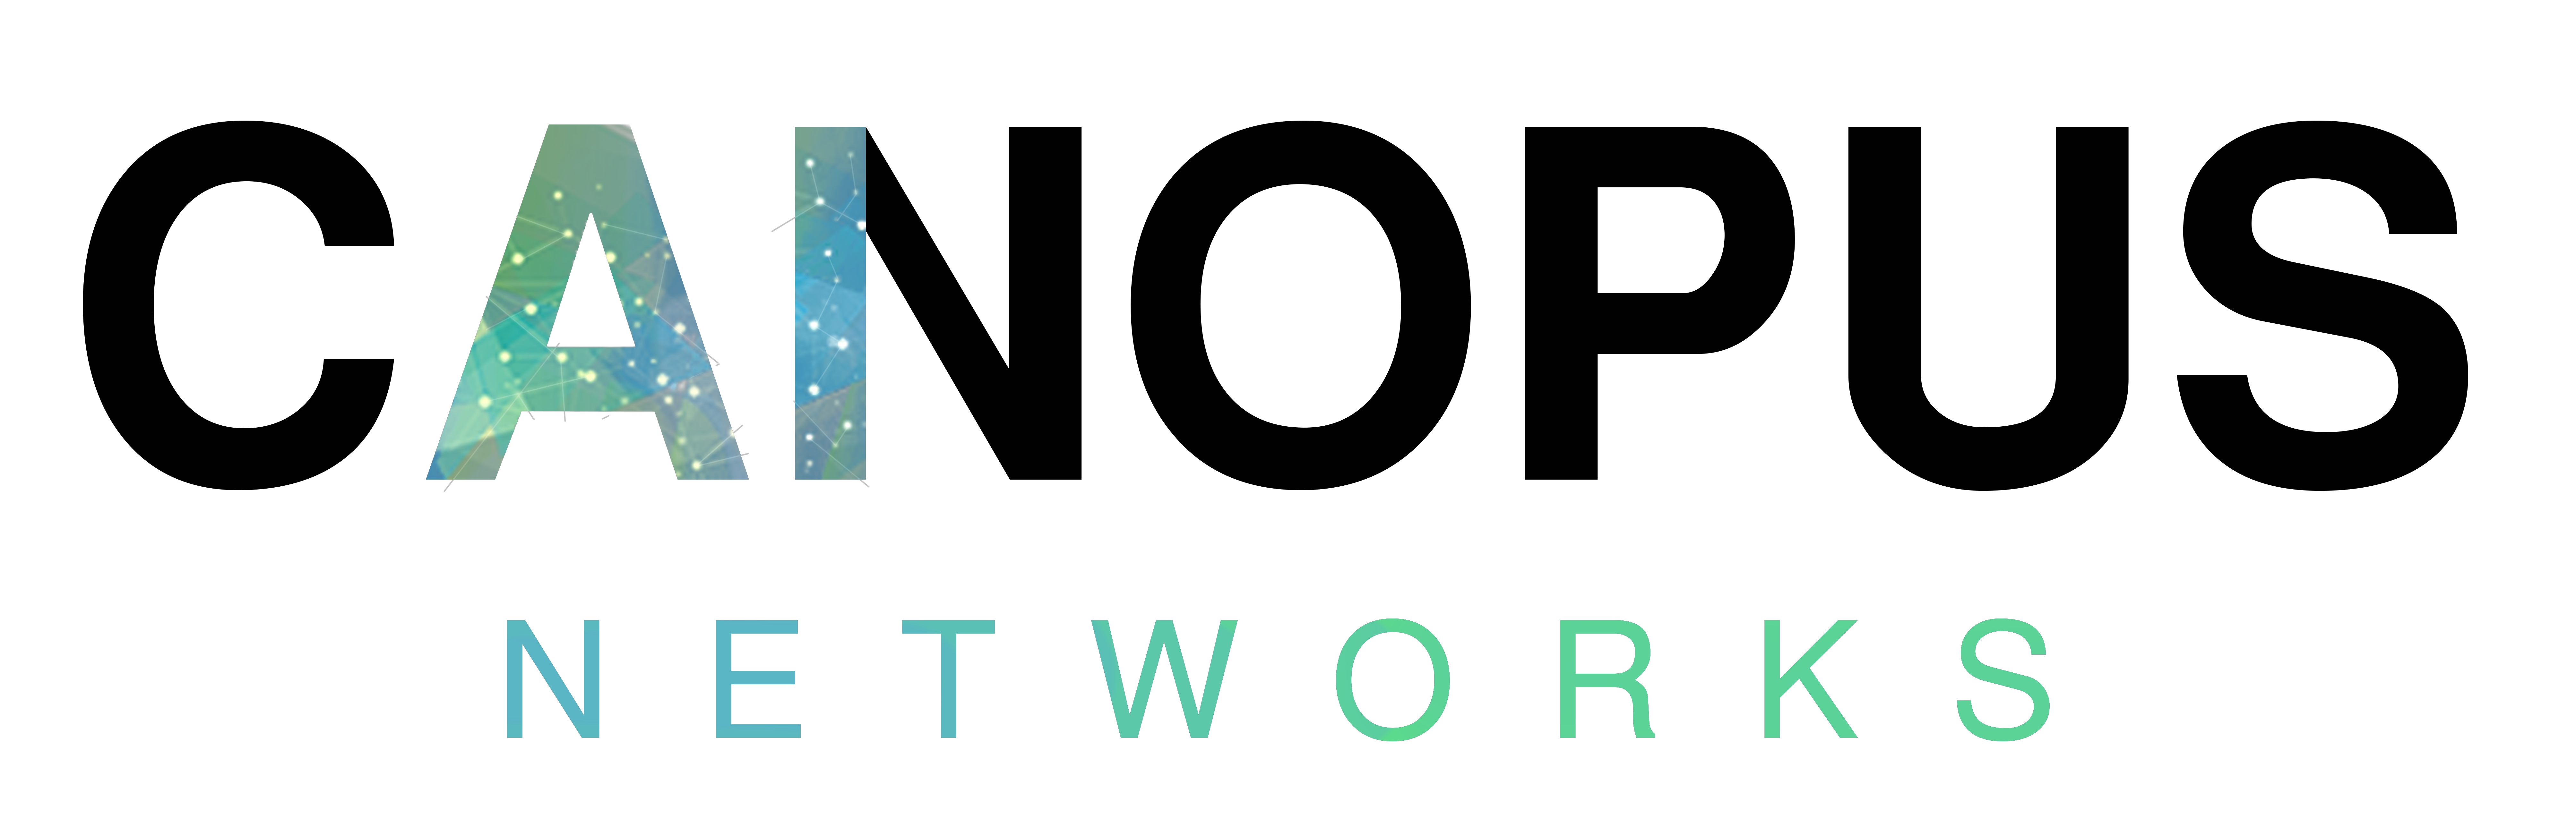 Canopus Networks